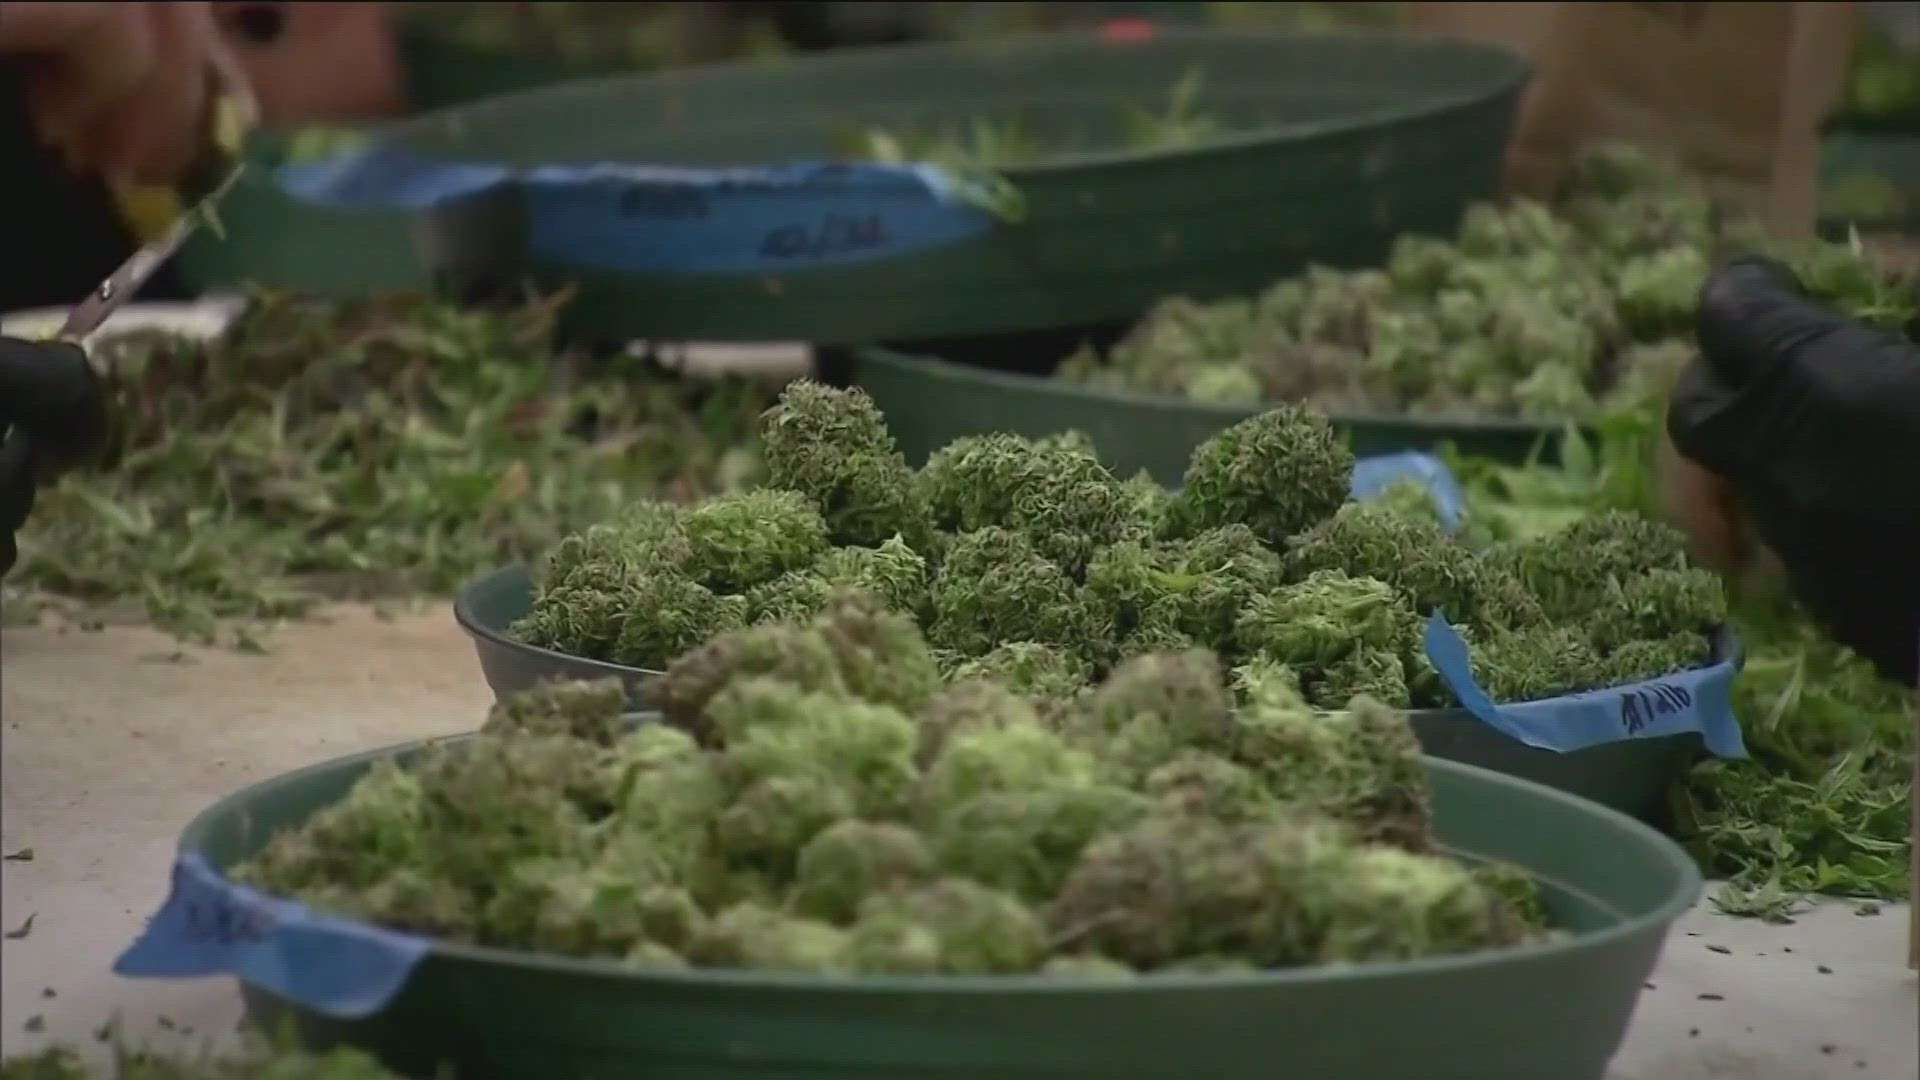 One of two citizen campaigns aimed for 2024, Kind Idaho aims to legalize marijuana for limited medical use in Idaho.